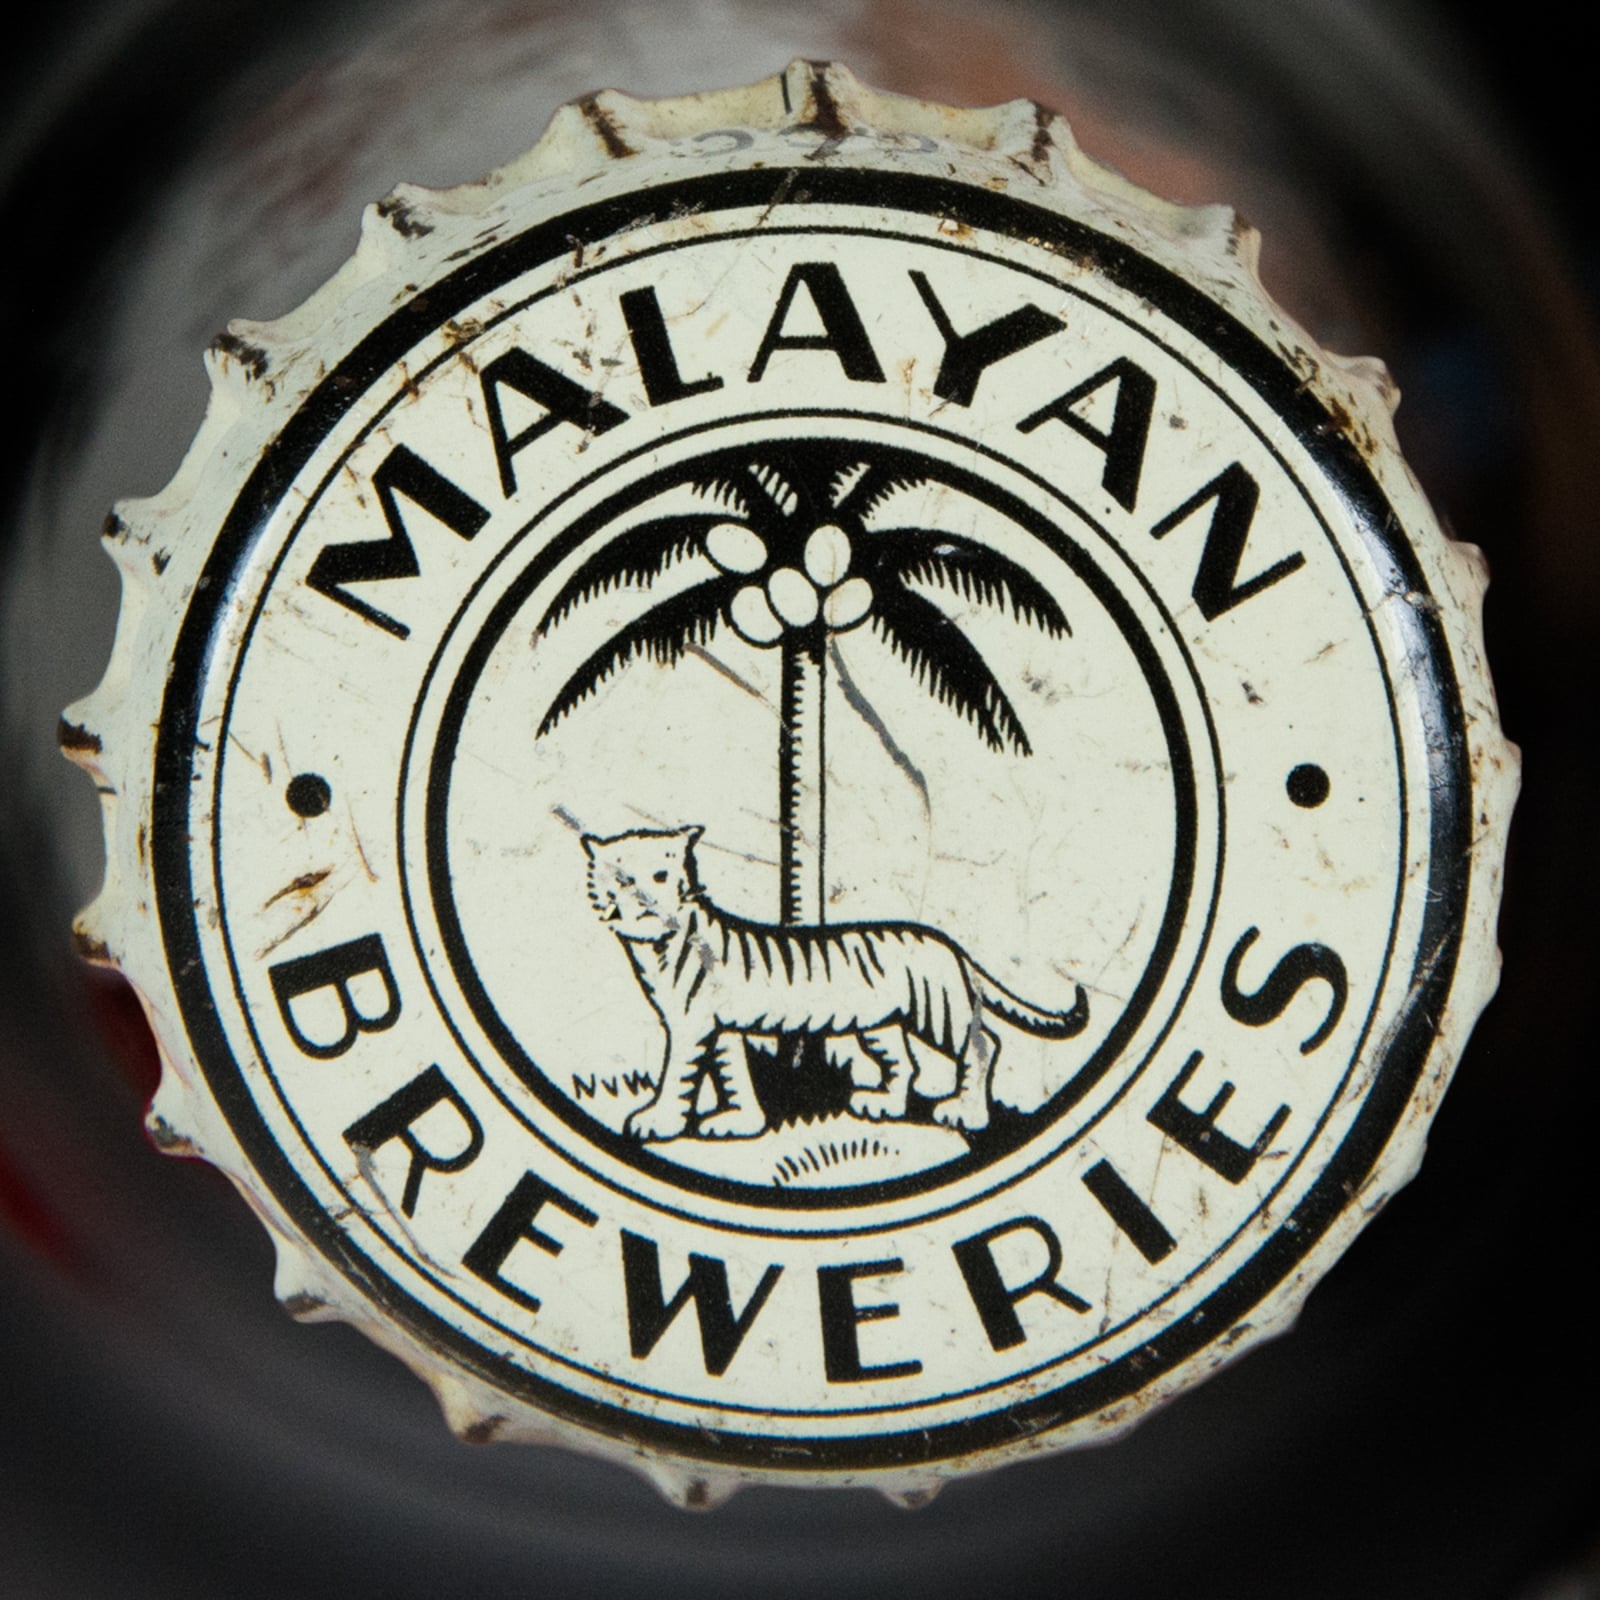 Malayan Breweries Cub Lager Beer Replica Bottle